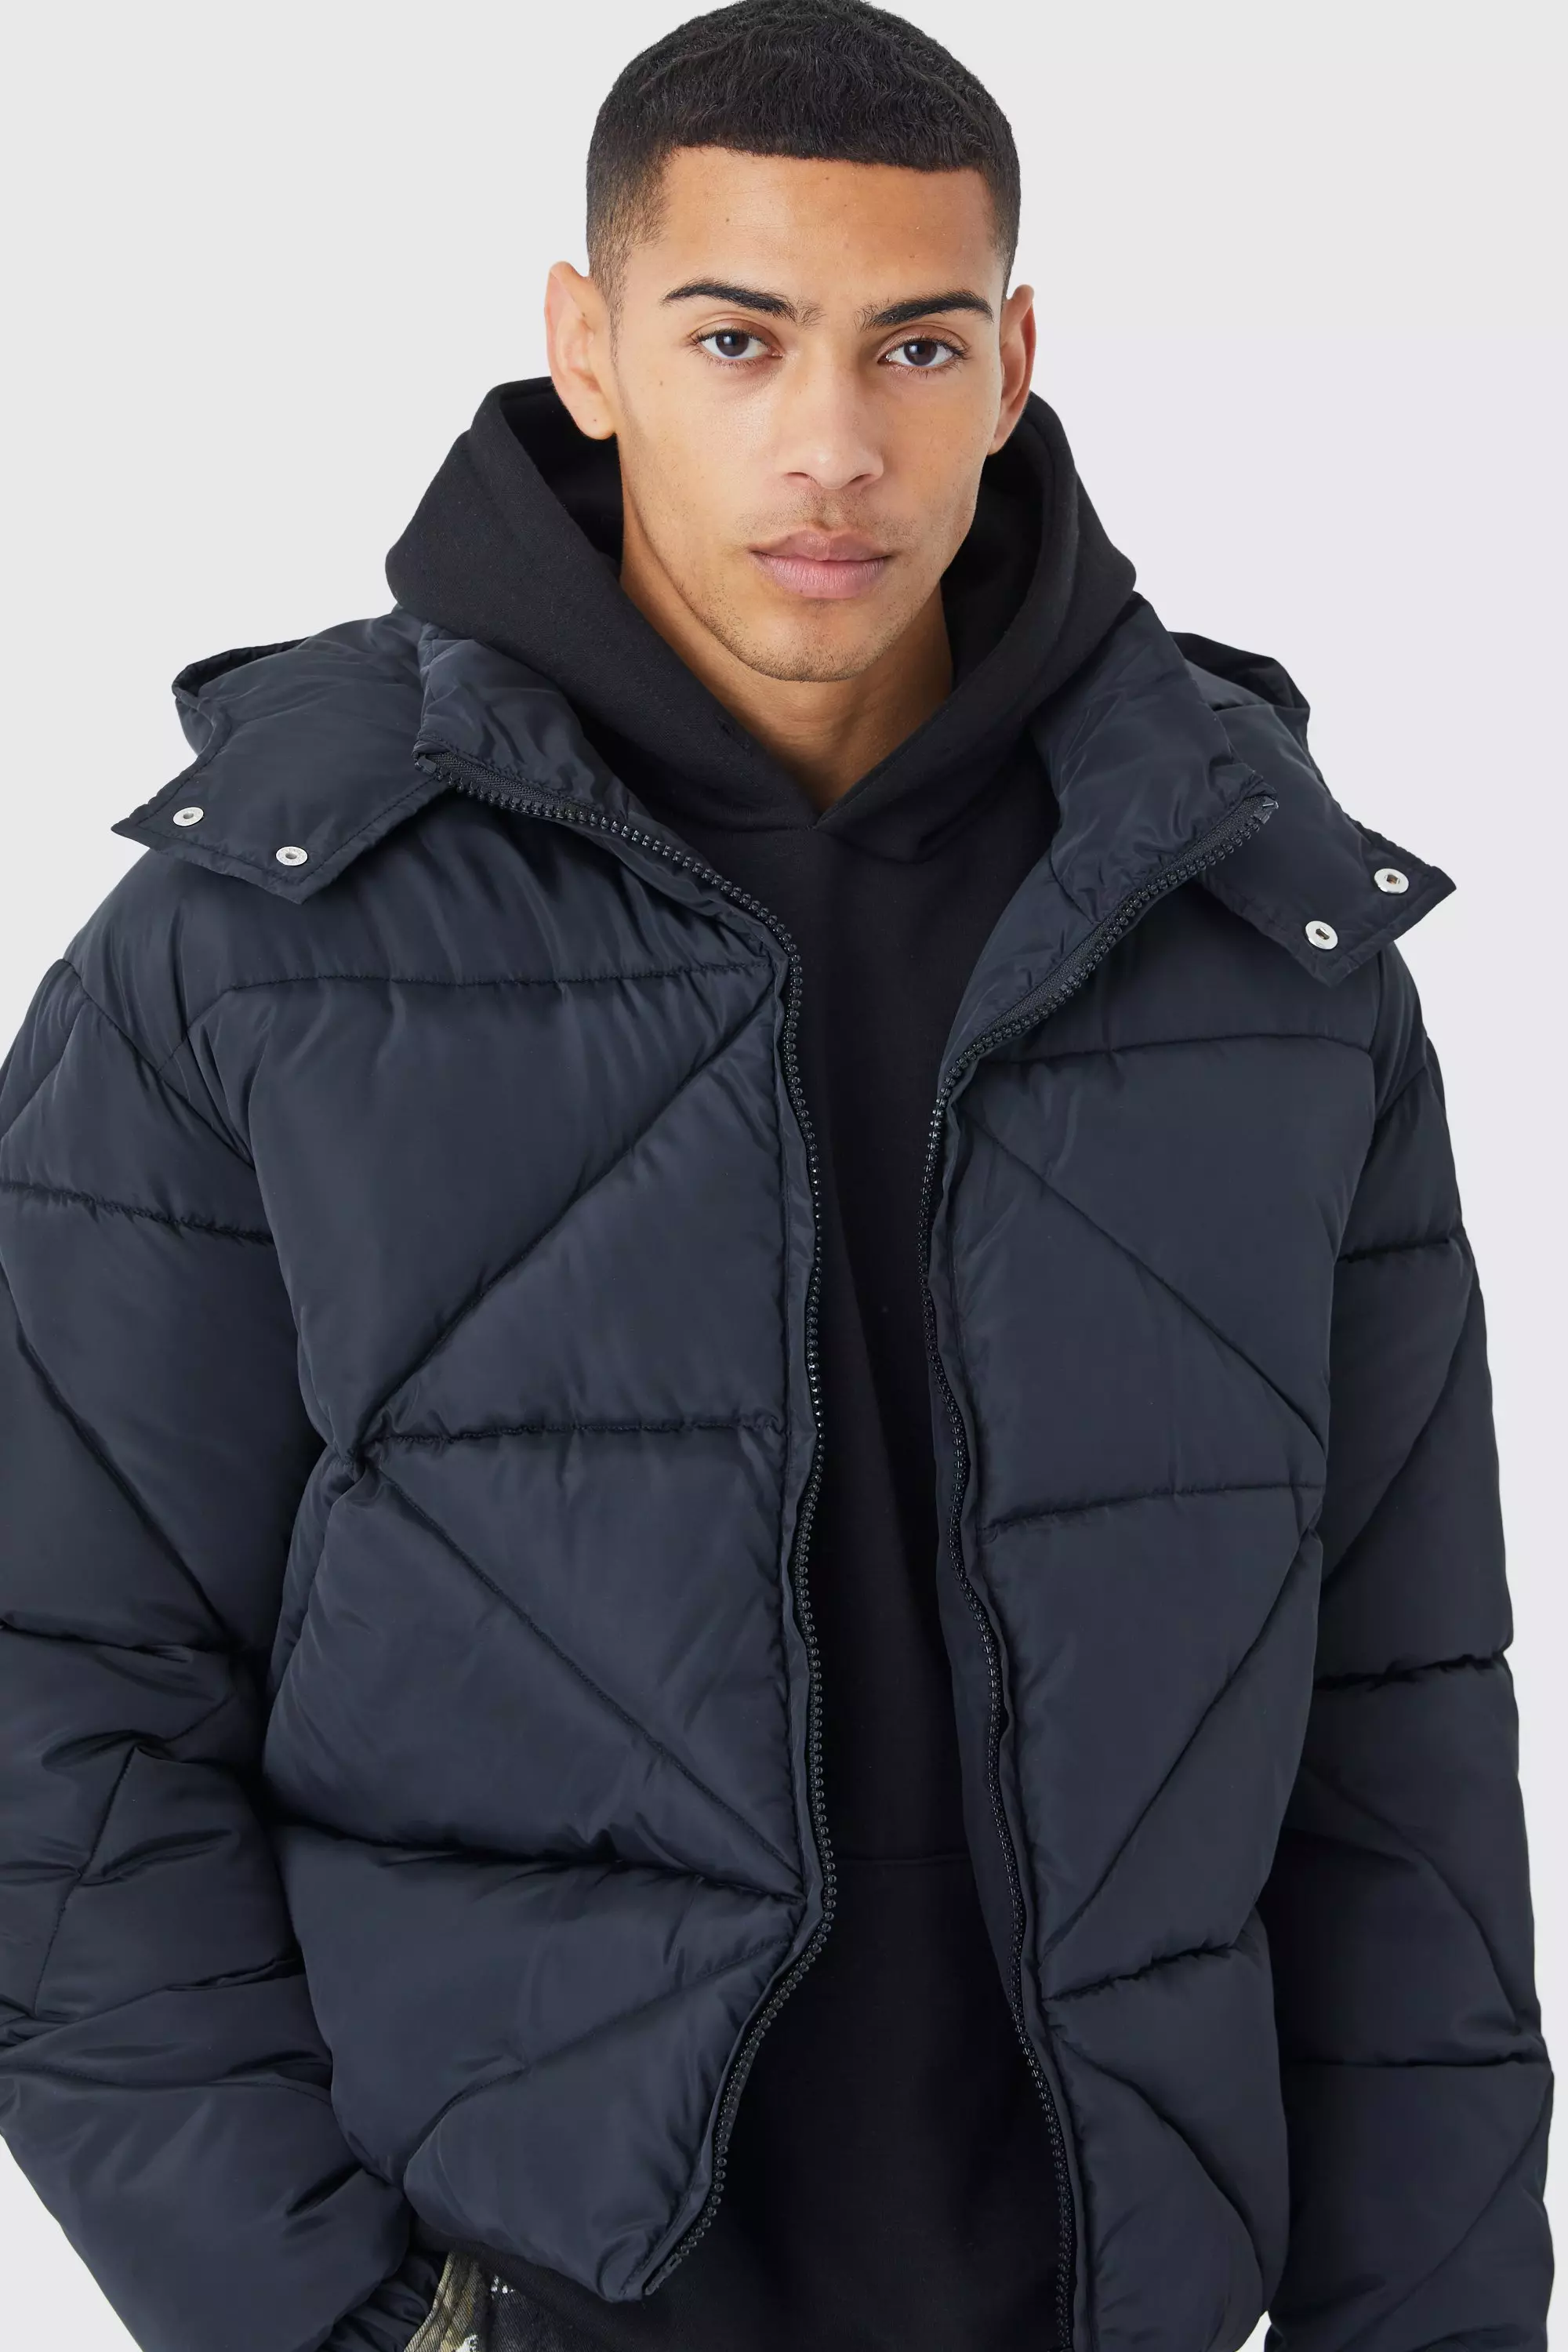 Travelers Love This  Packable Puffer Jacket